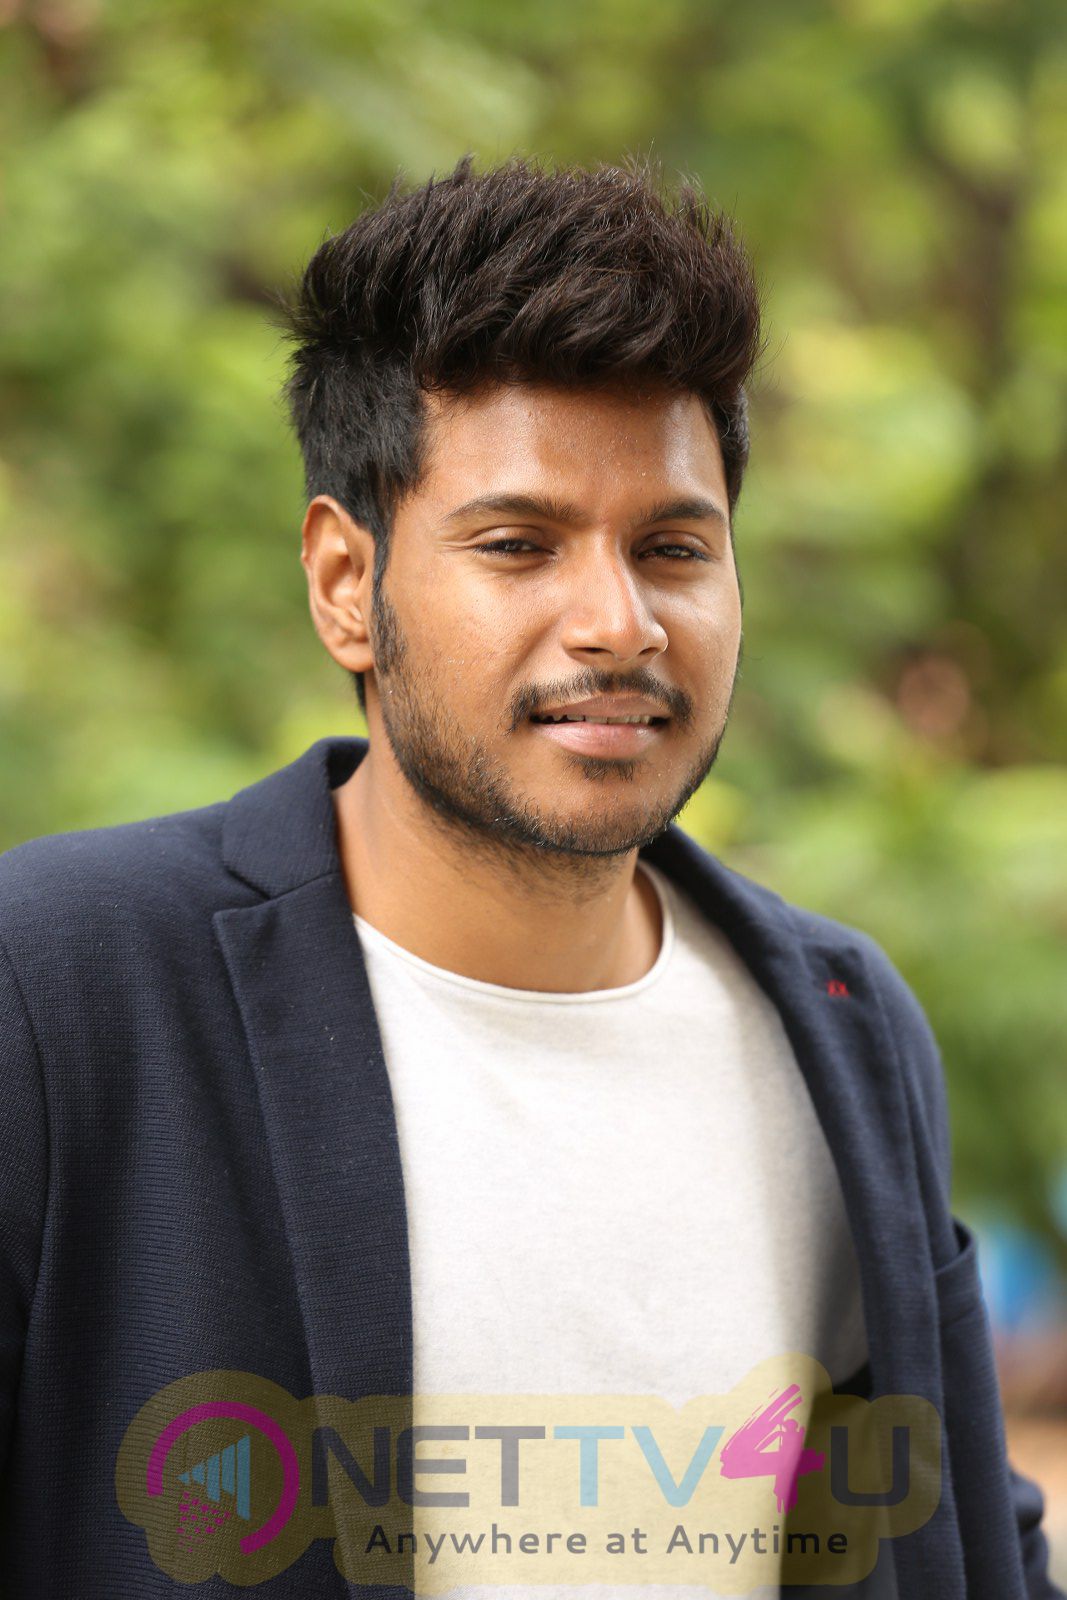 Sundeep Kishan on Twitter Photo Session time  I Love Poster  Shootssuch a fun amp creative job  httptcoLScoEm0gXe  Twitter